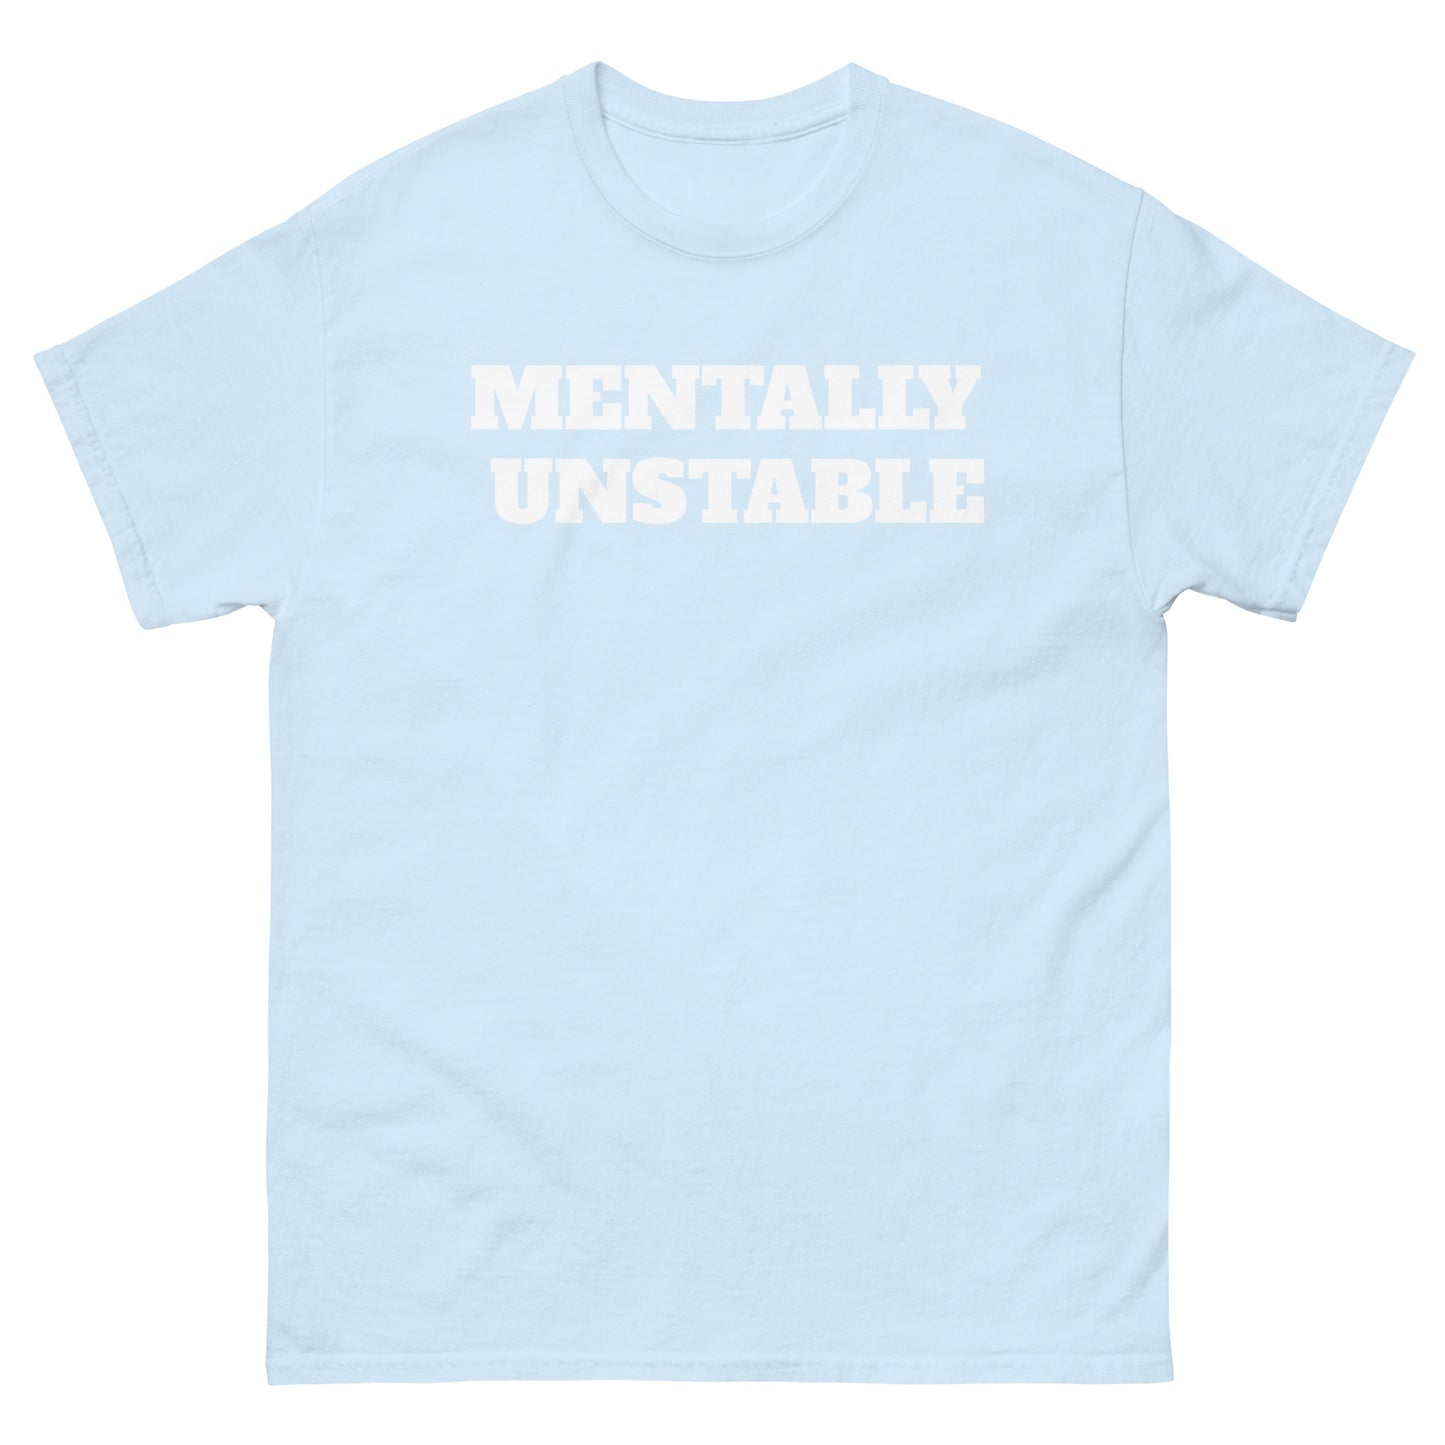 Mentally Unstable Matching Tee